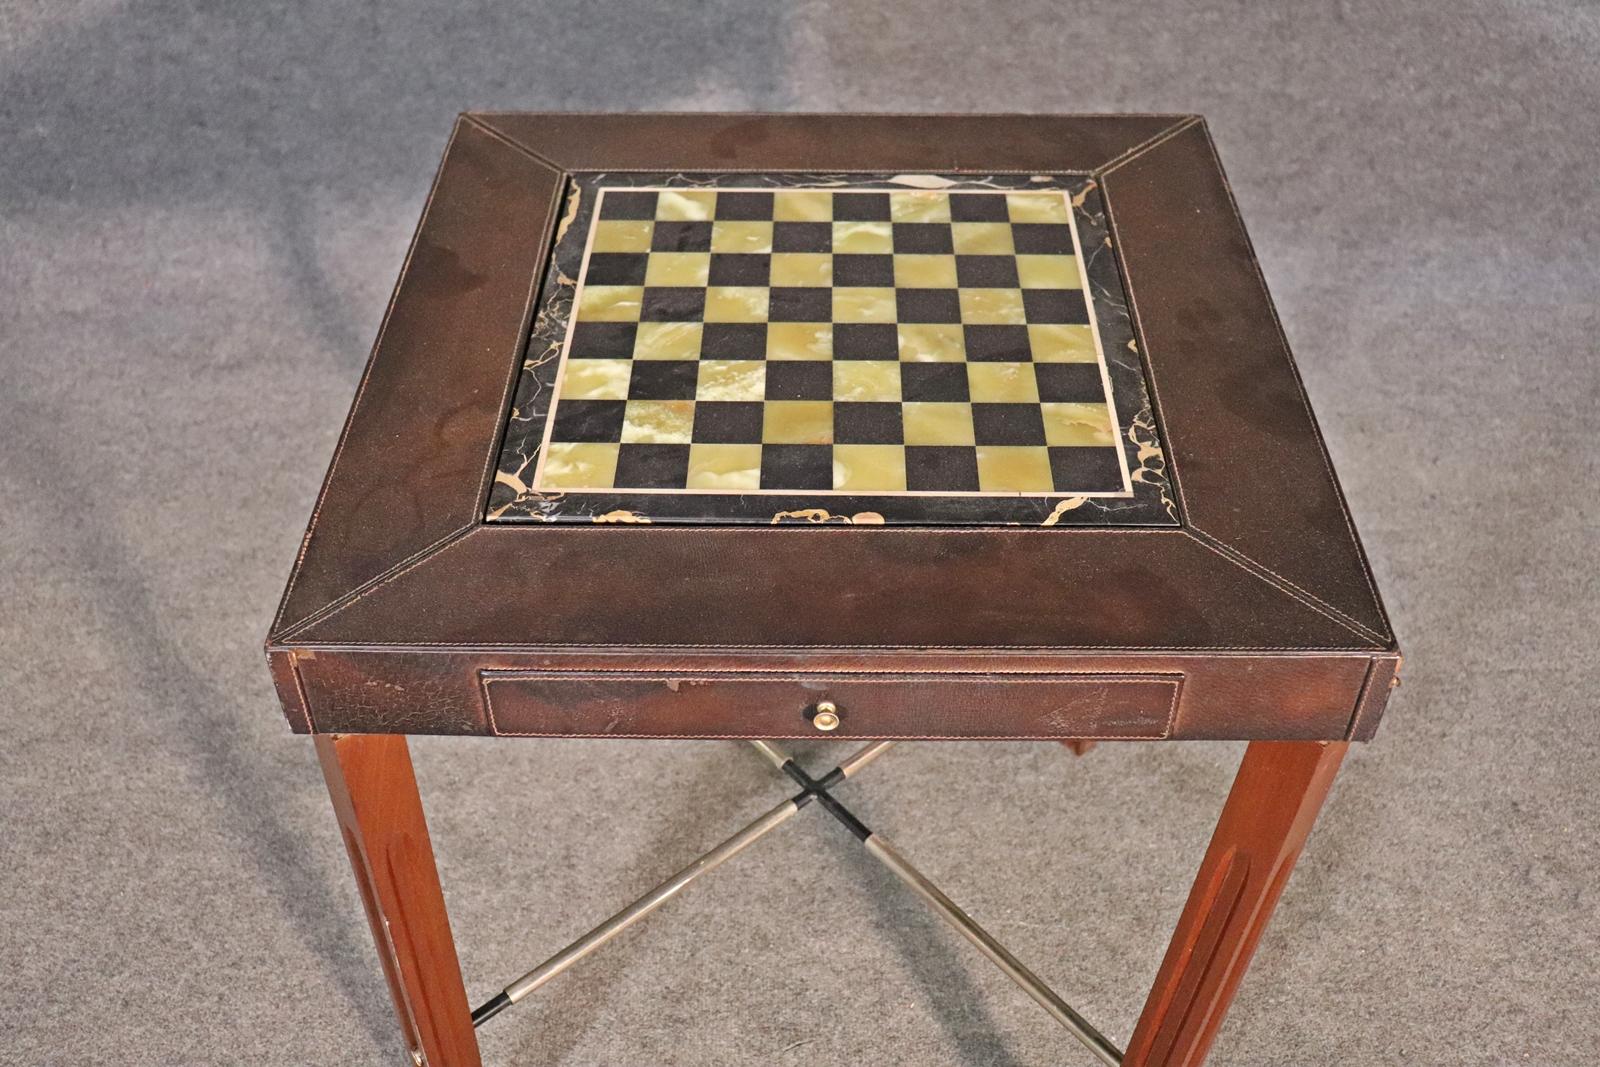 Exceptional Quality Aldo Tura Style Onyx and Leather Games Tables with Pieces In Good Condition In Swedesboro, NJ